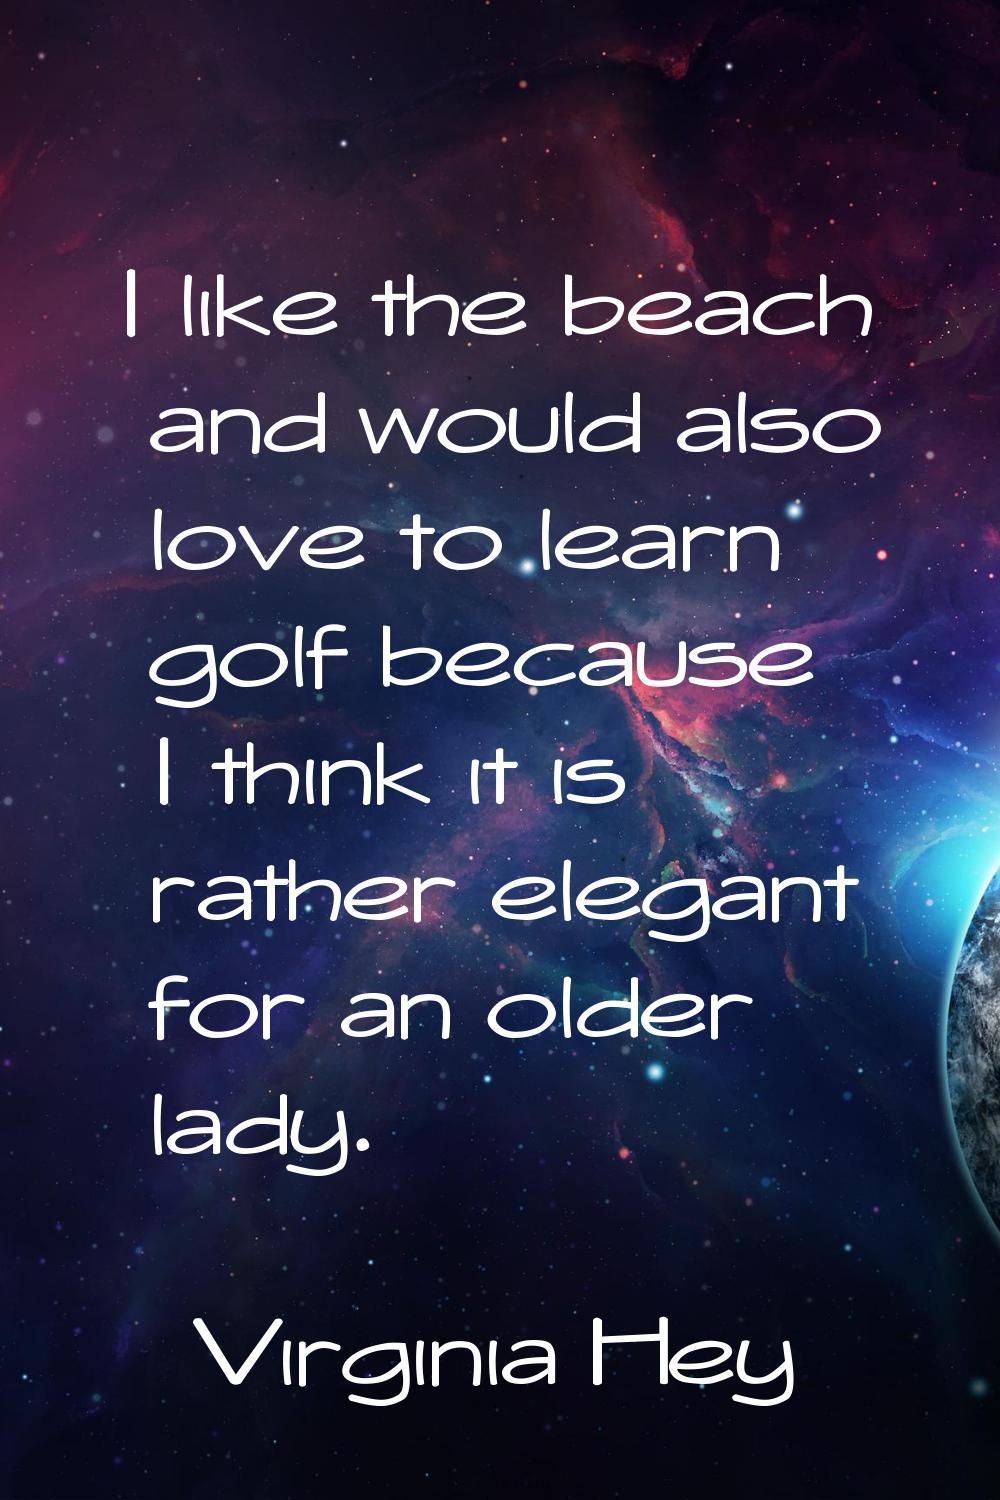 I like the beach and would also love to learn golf because I think it is rather elegant for an olde